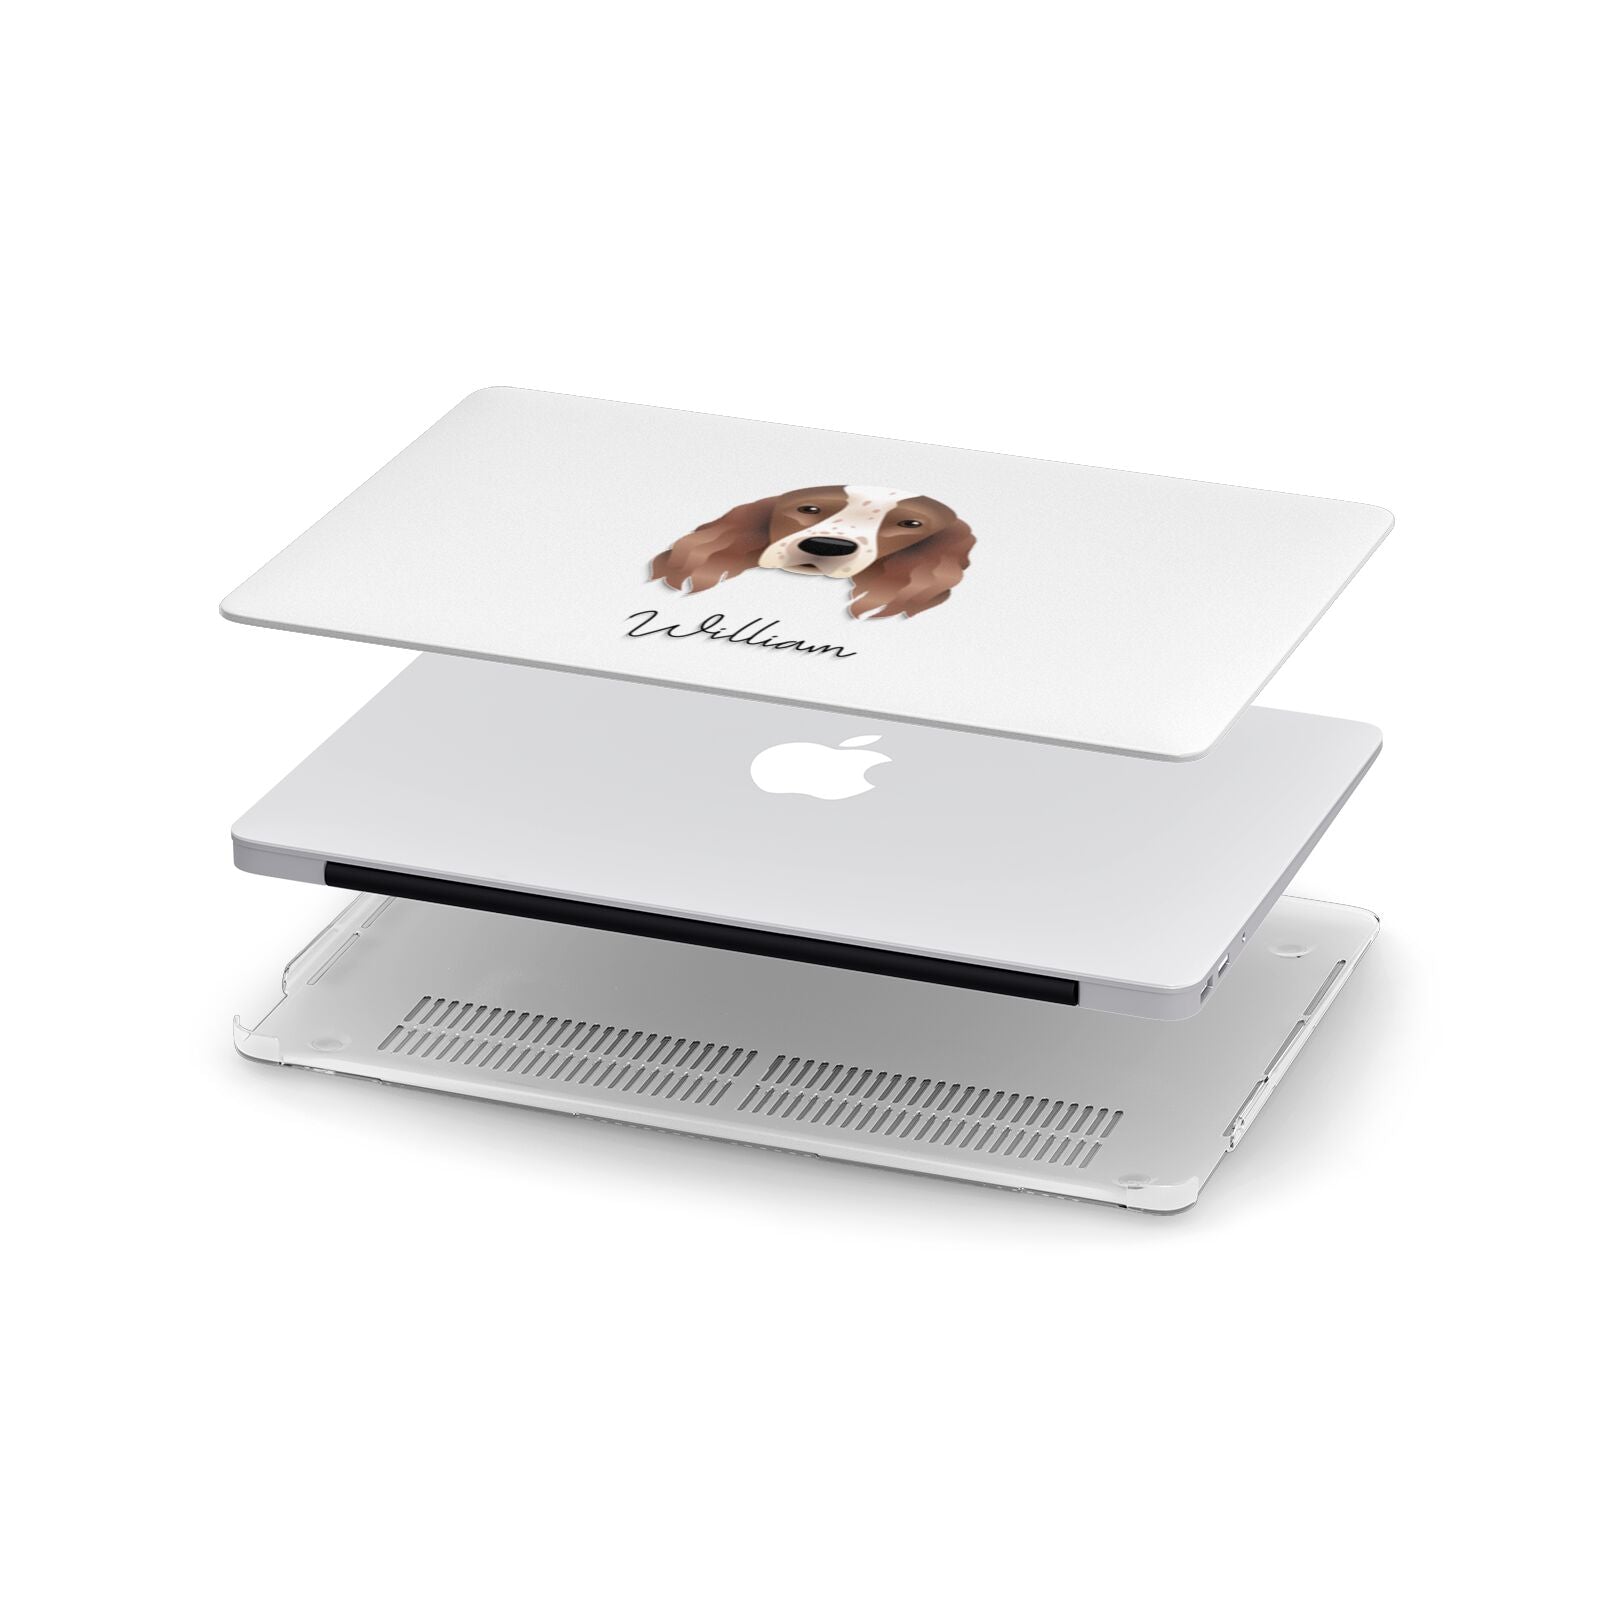 Irish Red White Setter Personalised Apple MacBook Case in Detail